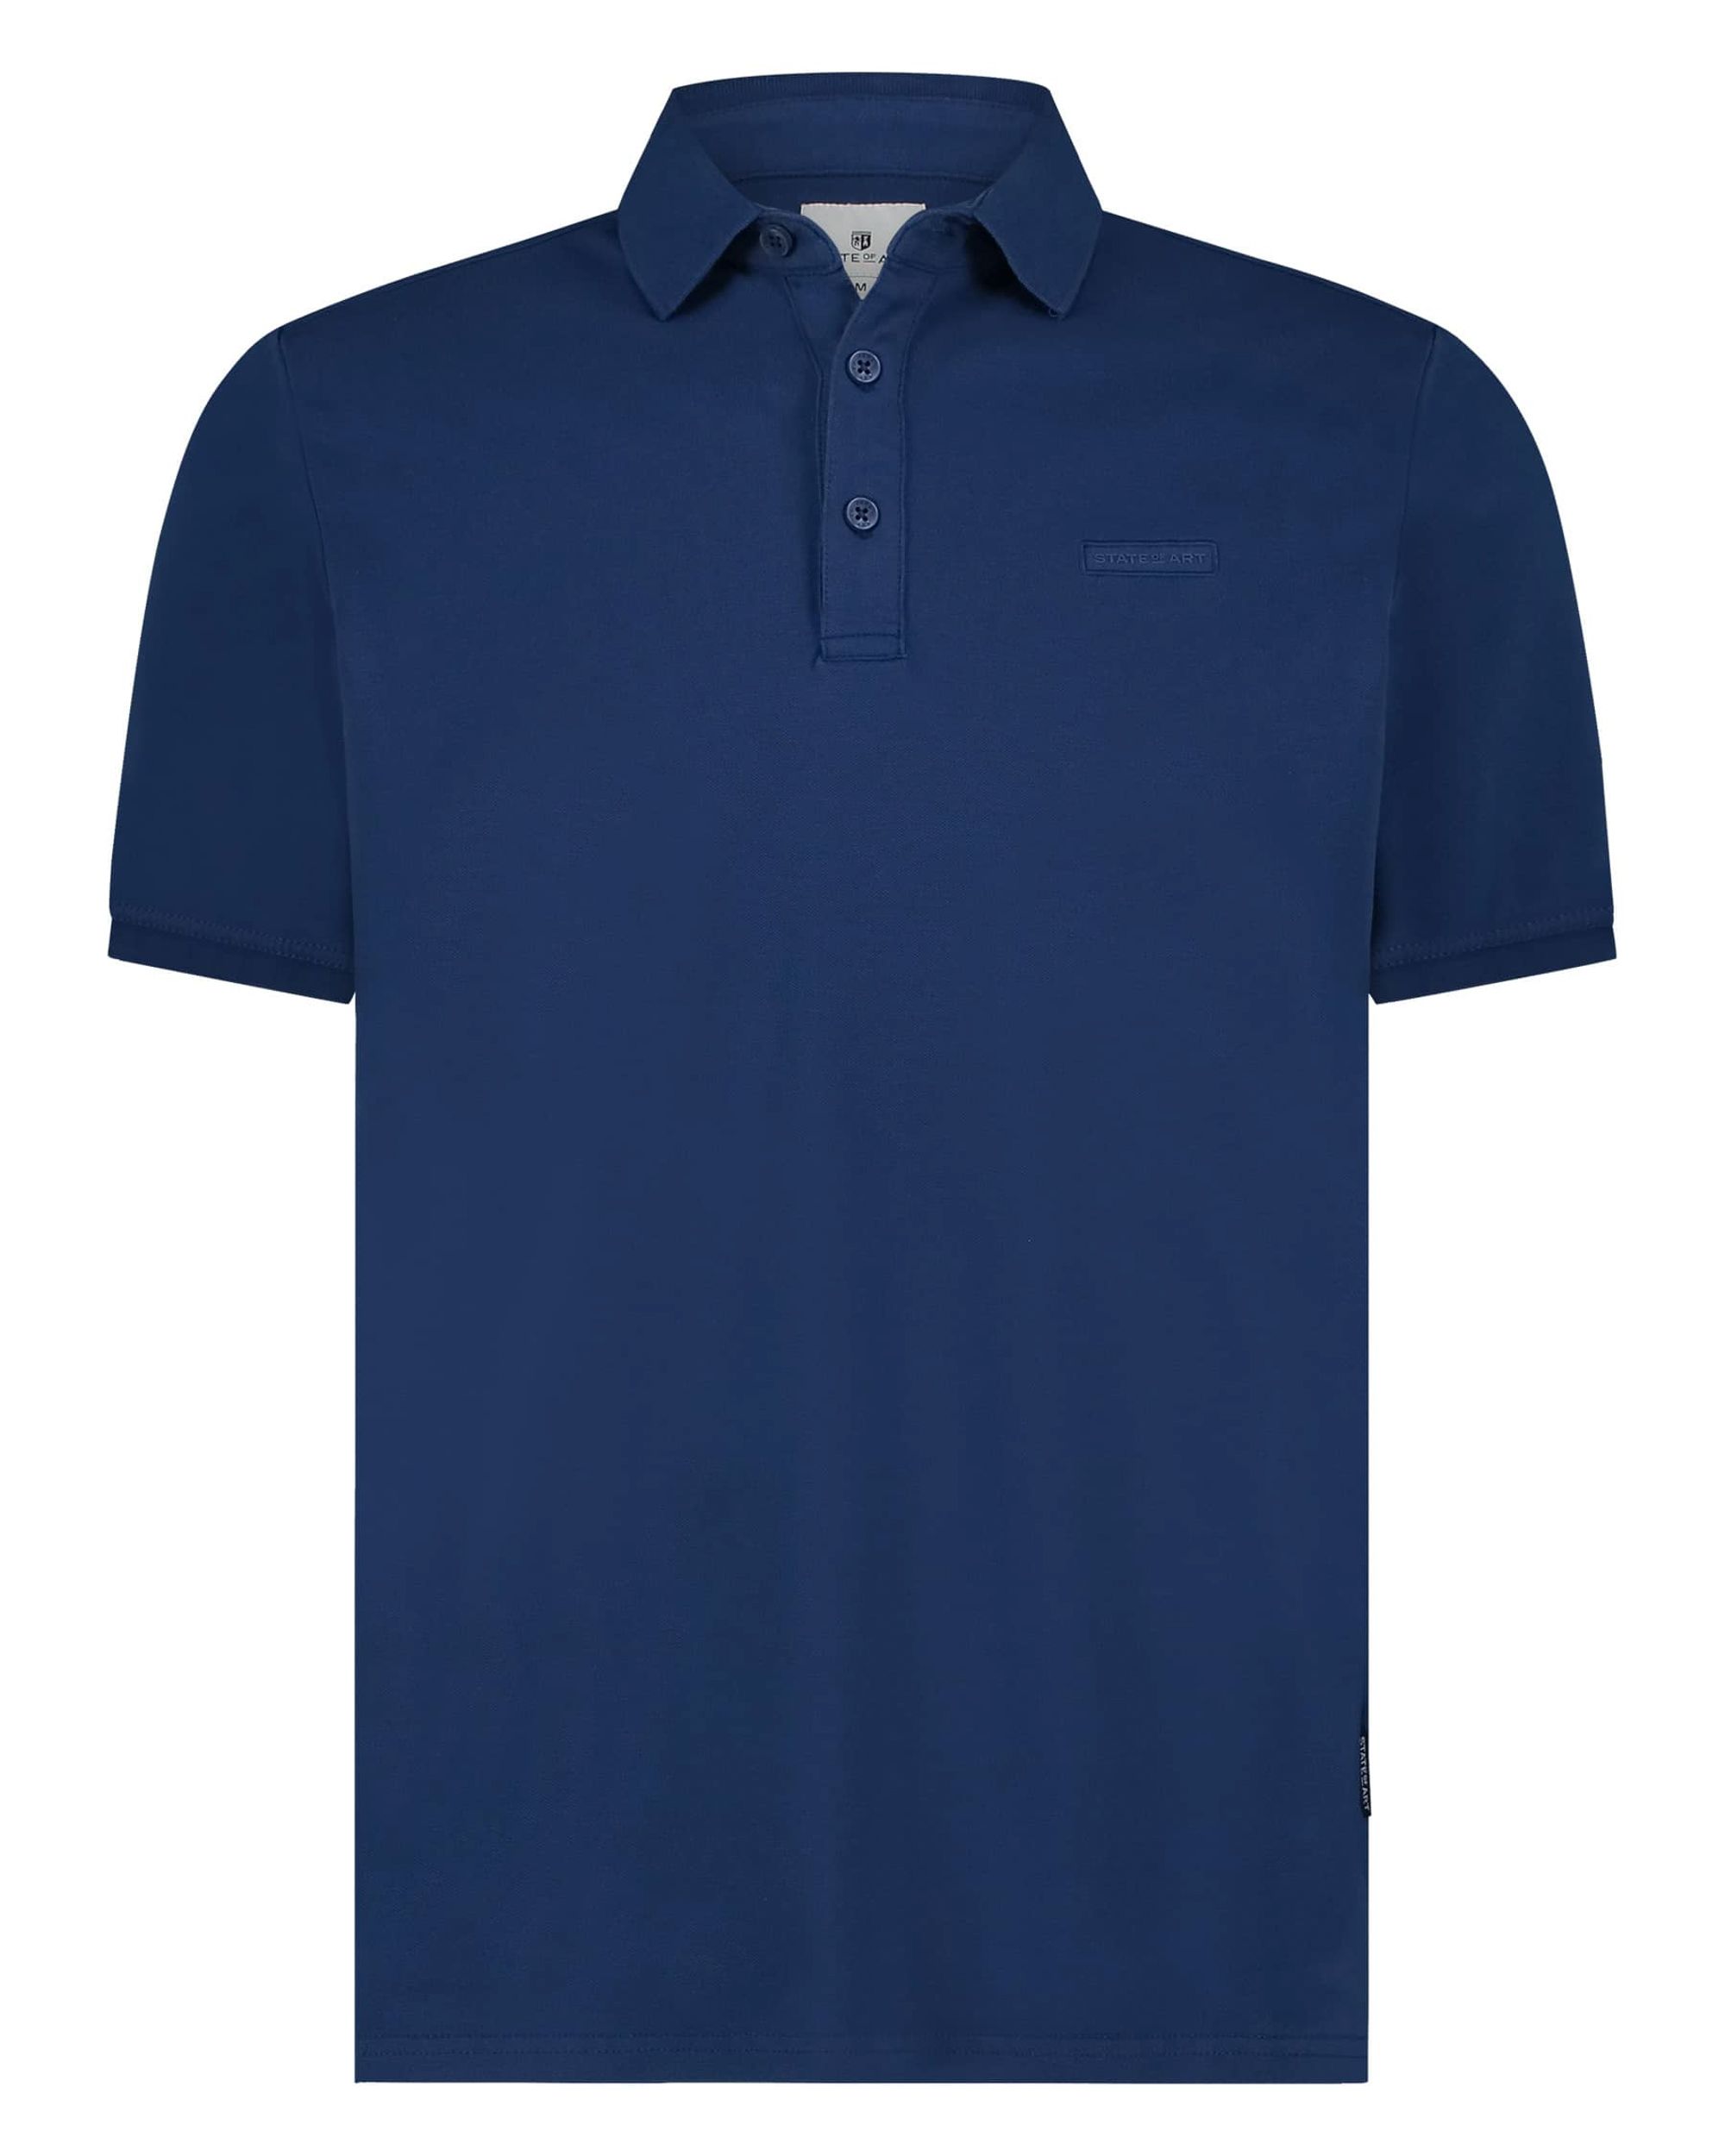 State of Art Polo KM Donker blauw 093443-002-4XL